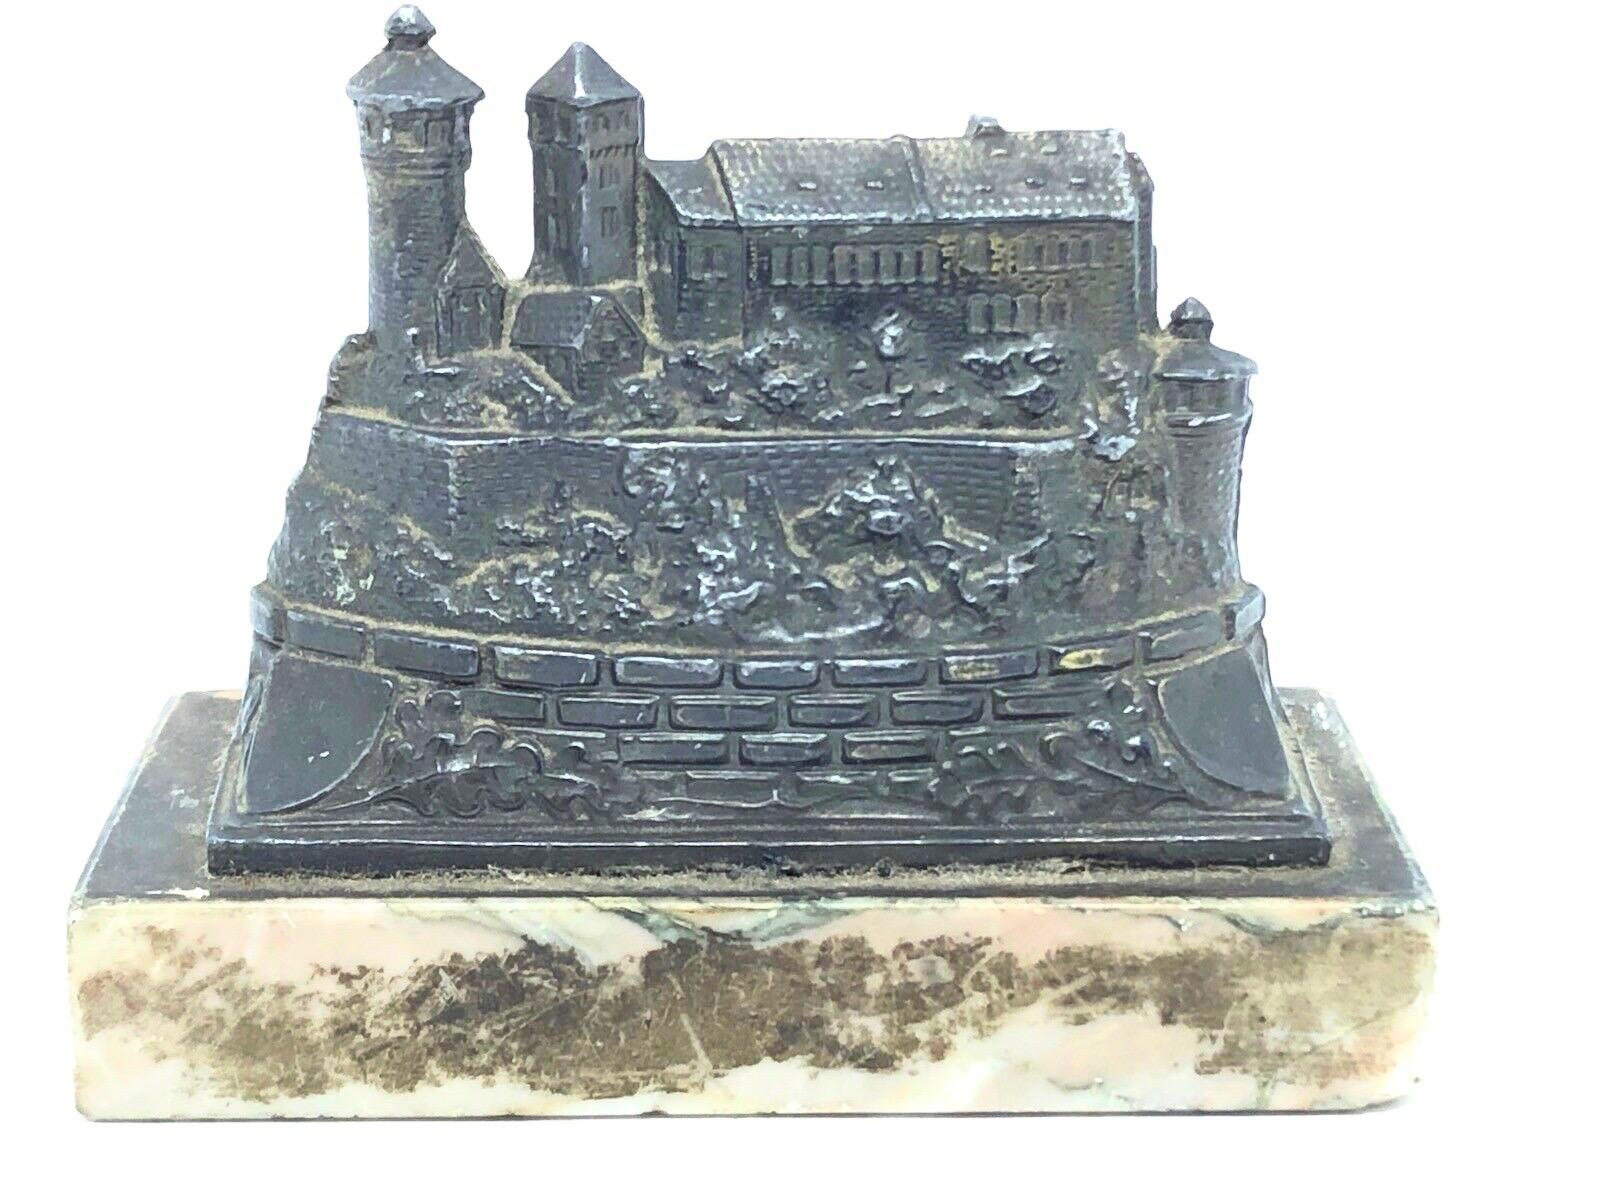 A Nuremberg Castle 1930s Souvenir building architectural model. Some wear with a nice patina, but this is old-age. Made of metal on a marble base. This was bought as a souvenir in Nuremberg, Germany. A beautiful nice desktop item or just a display